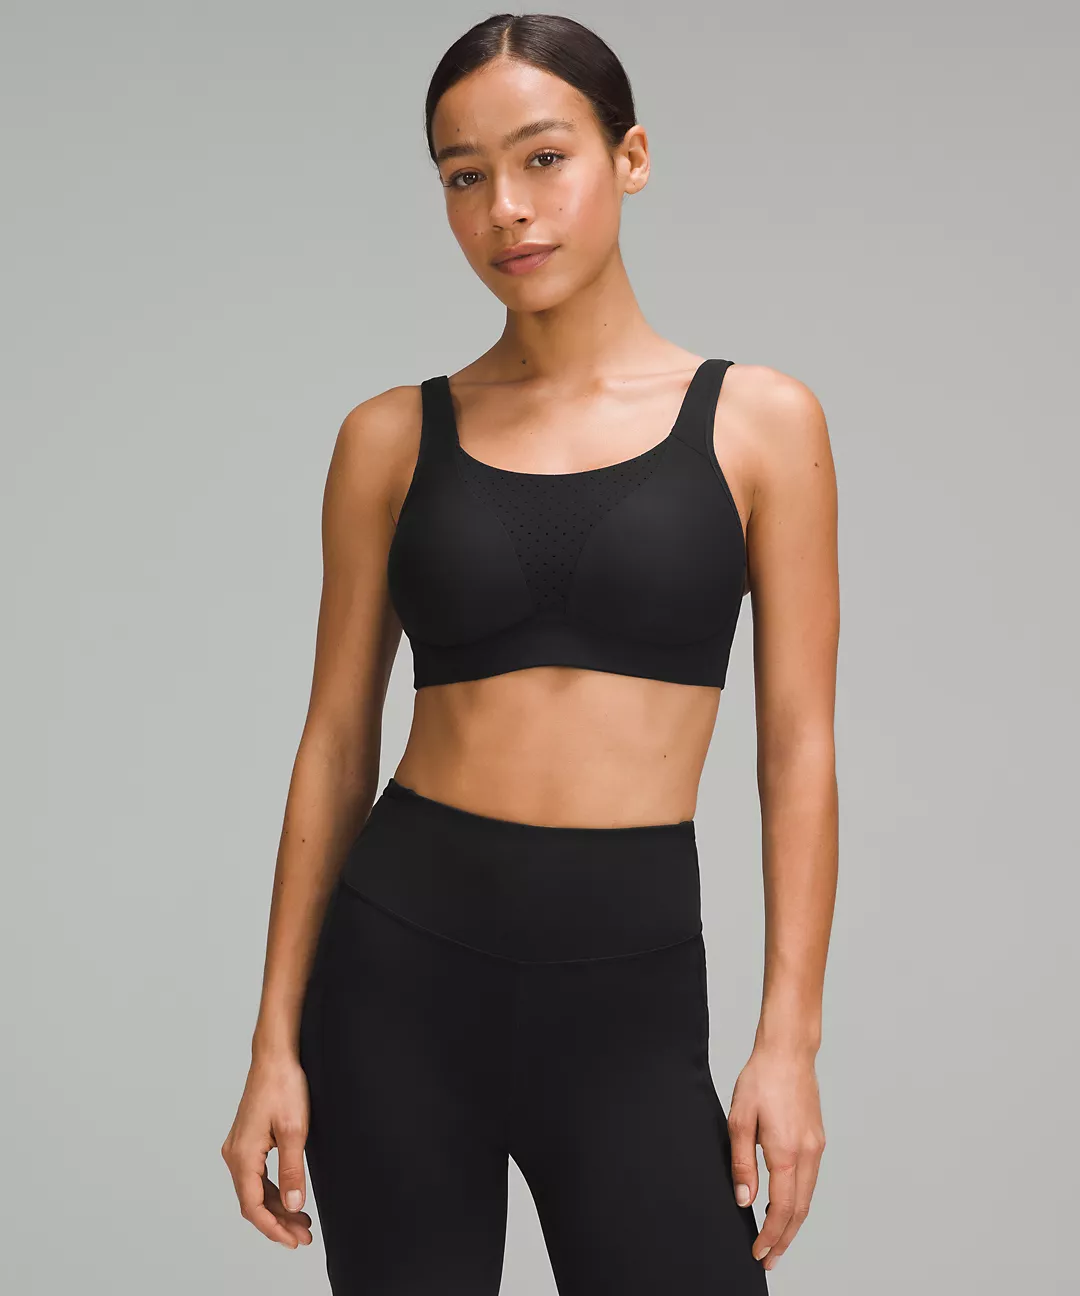 Best Sports Bras: Top 5 Brands Most Recommended By Experts - Study Finds